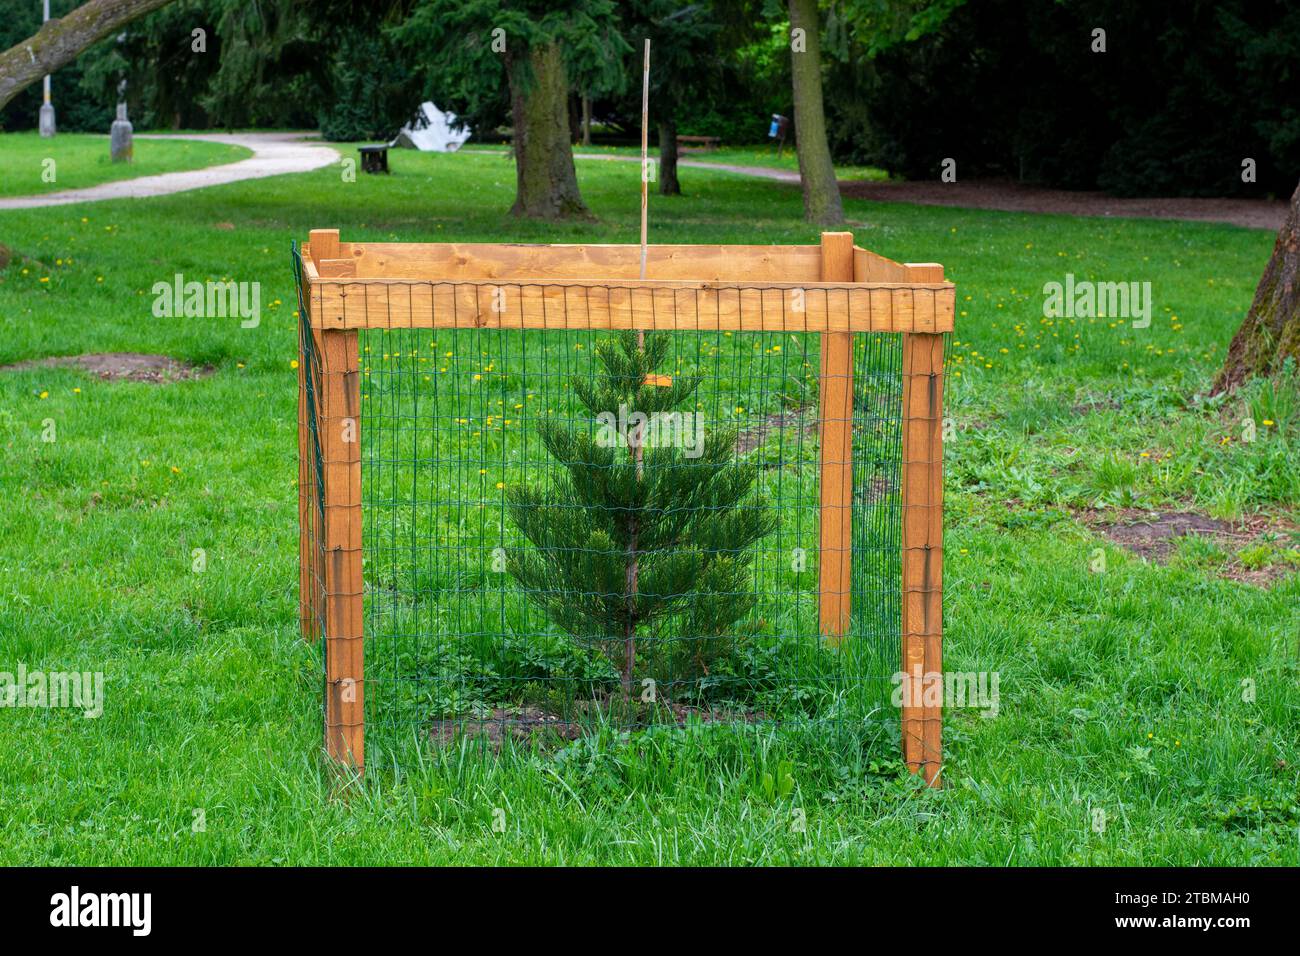 Mesh tree guard protecting young tree from wildlife damage. Fence protecting tree in the park Stock Photo